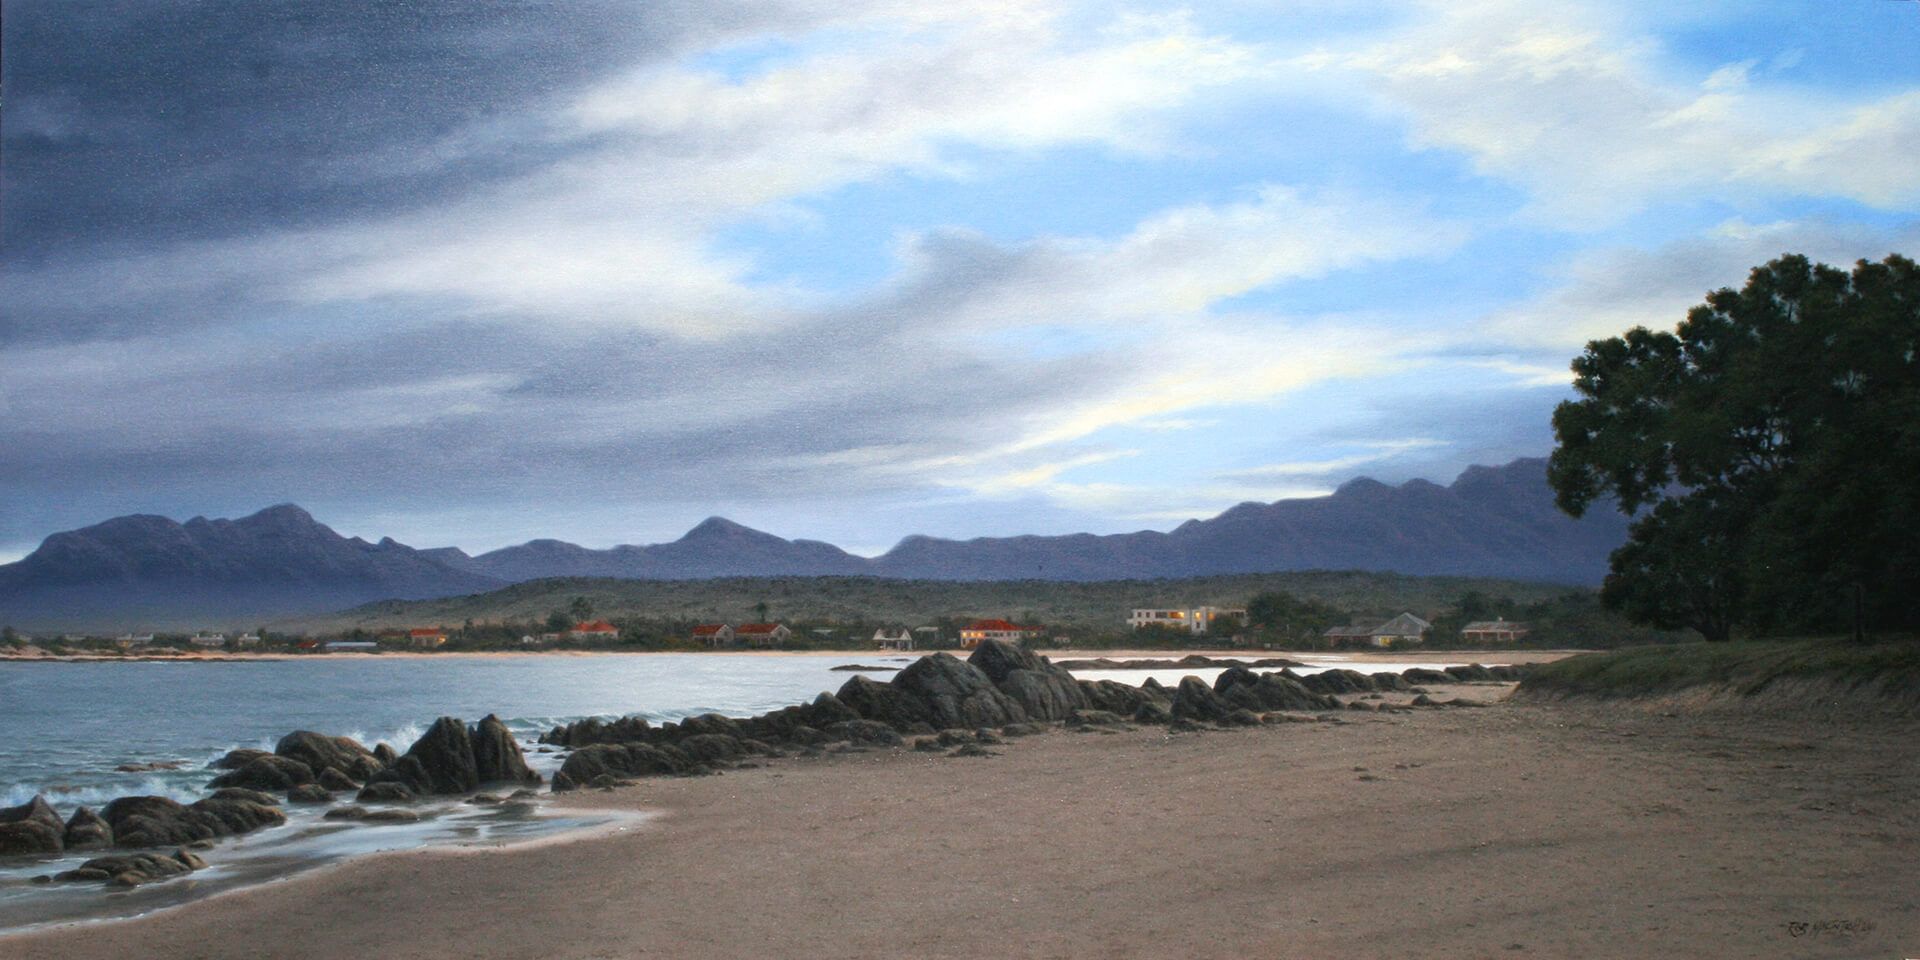 Photorealistic painting of the beach at Gordon's Bay